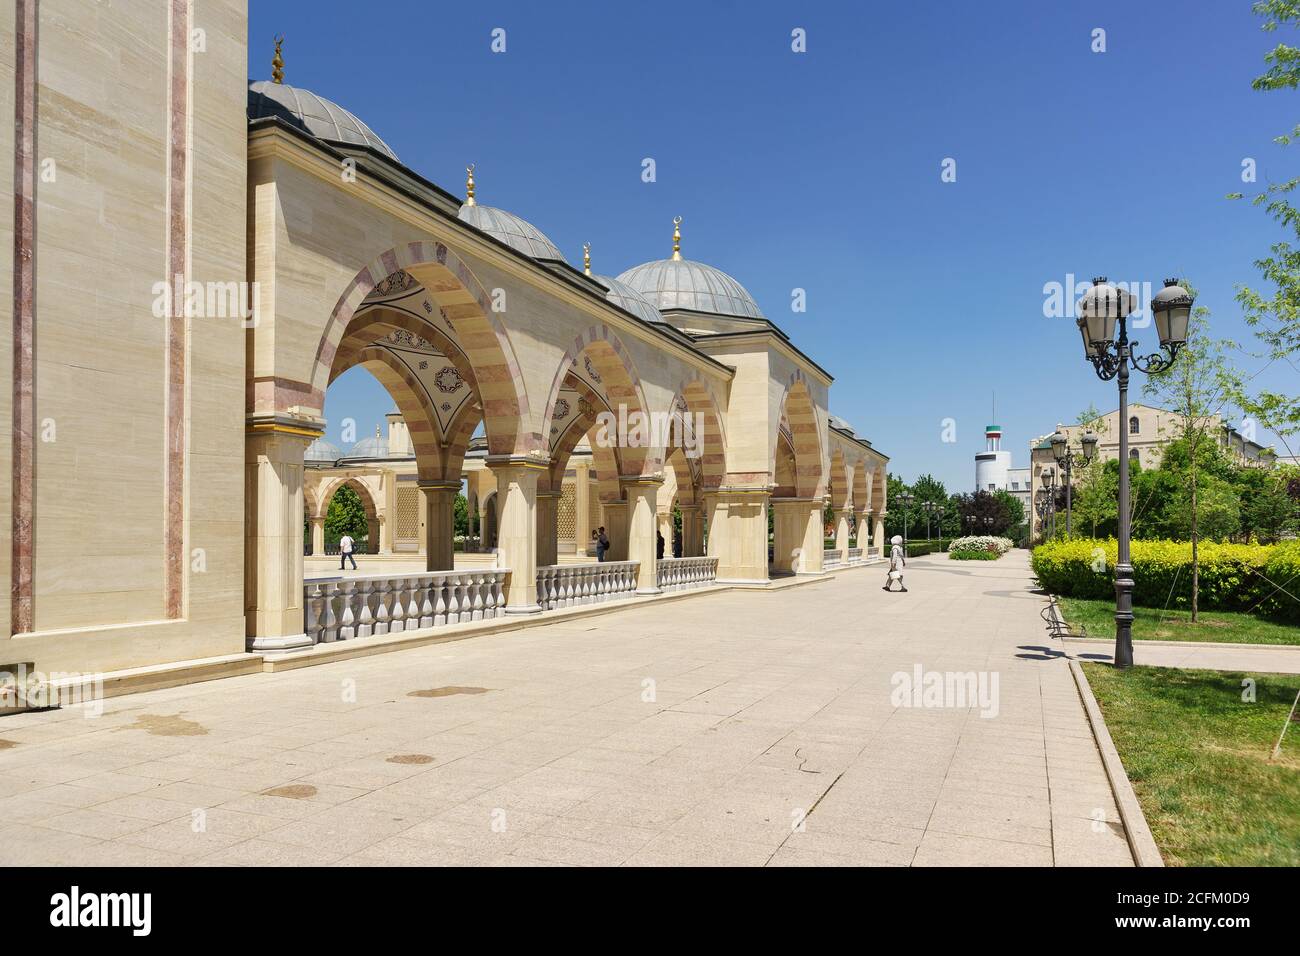 Grozny, Chechen Republic, Russia - June 02, 2019: Summer gallery of the new beautiful mosque the Heart of Chechnya named after Akhmat Kadyrov in the c Stock Photo